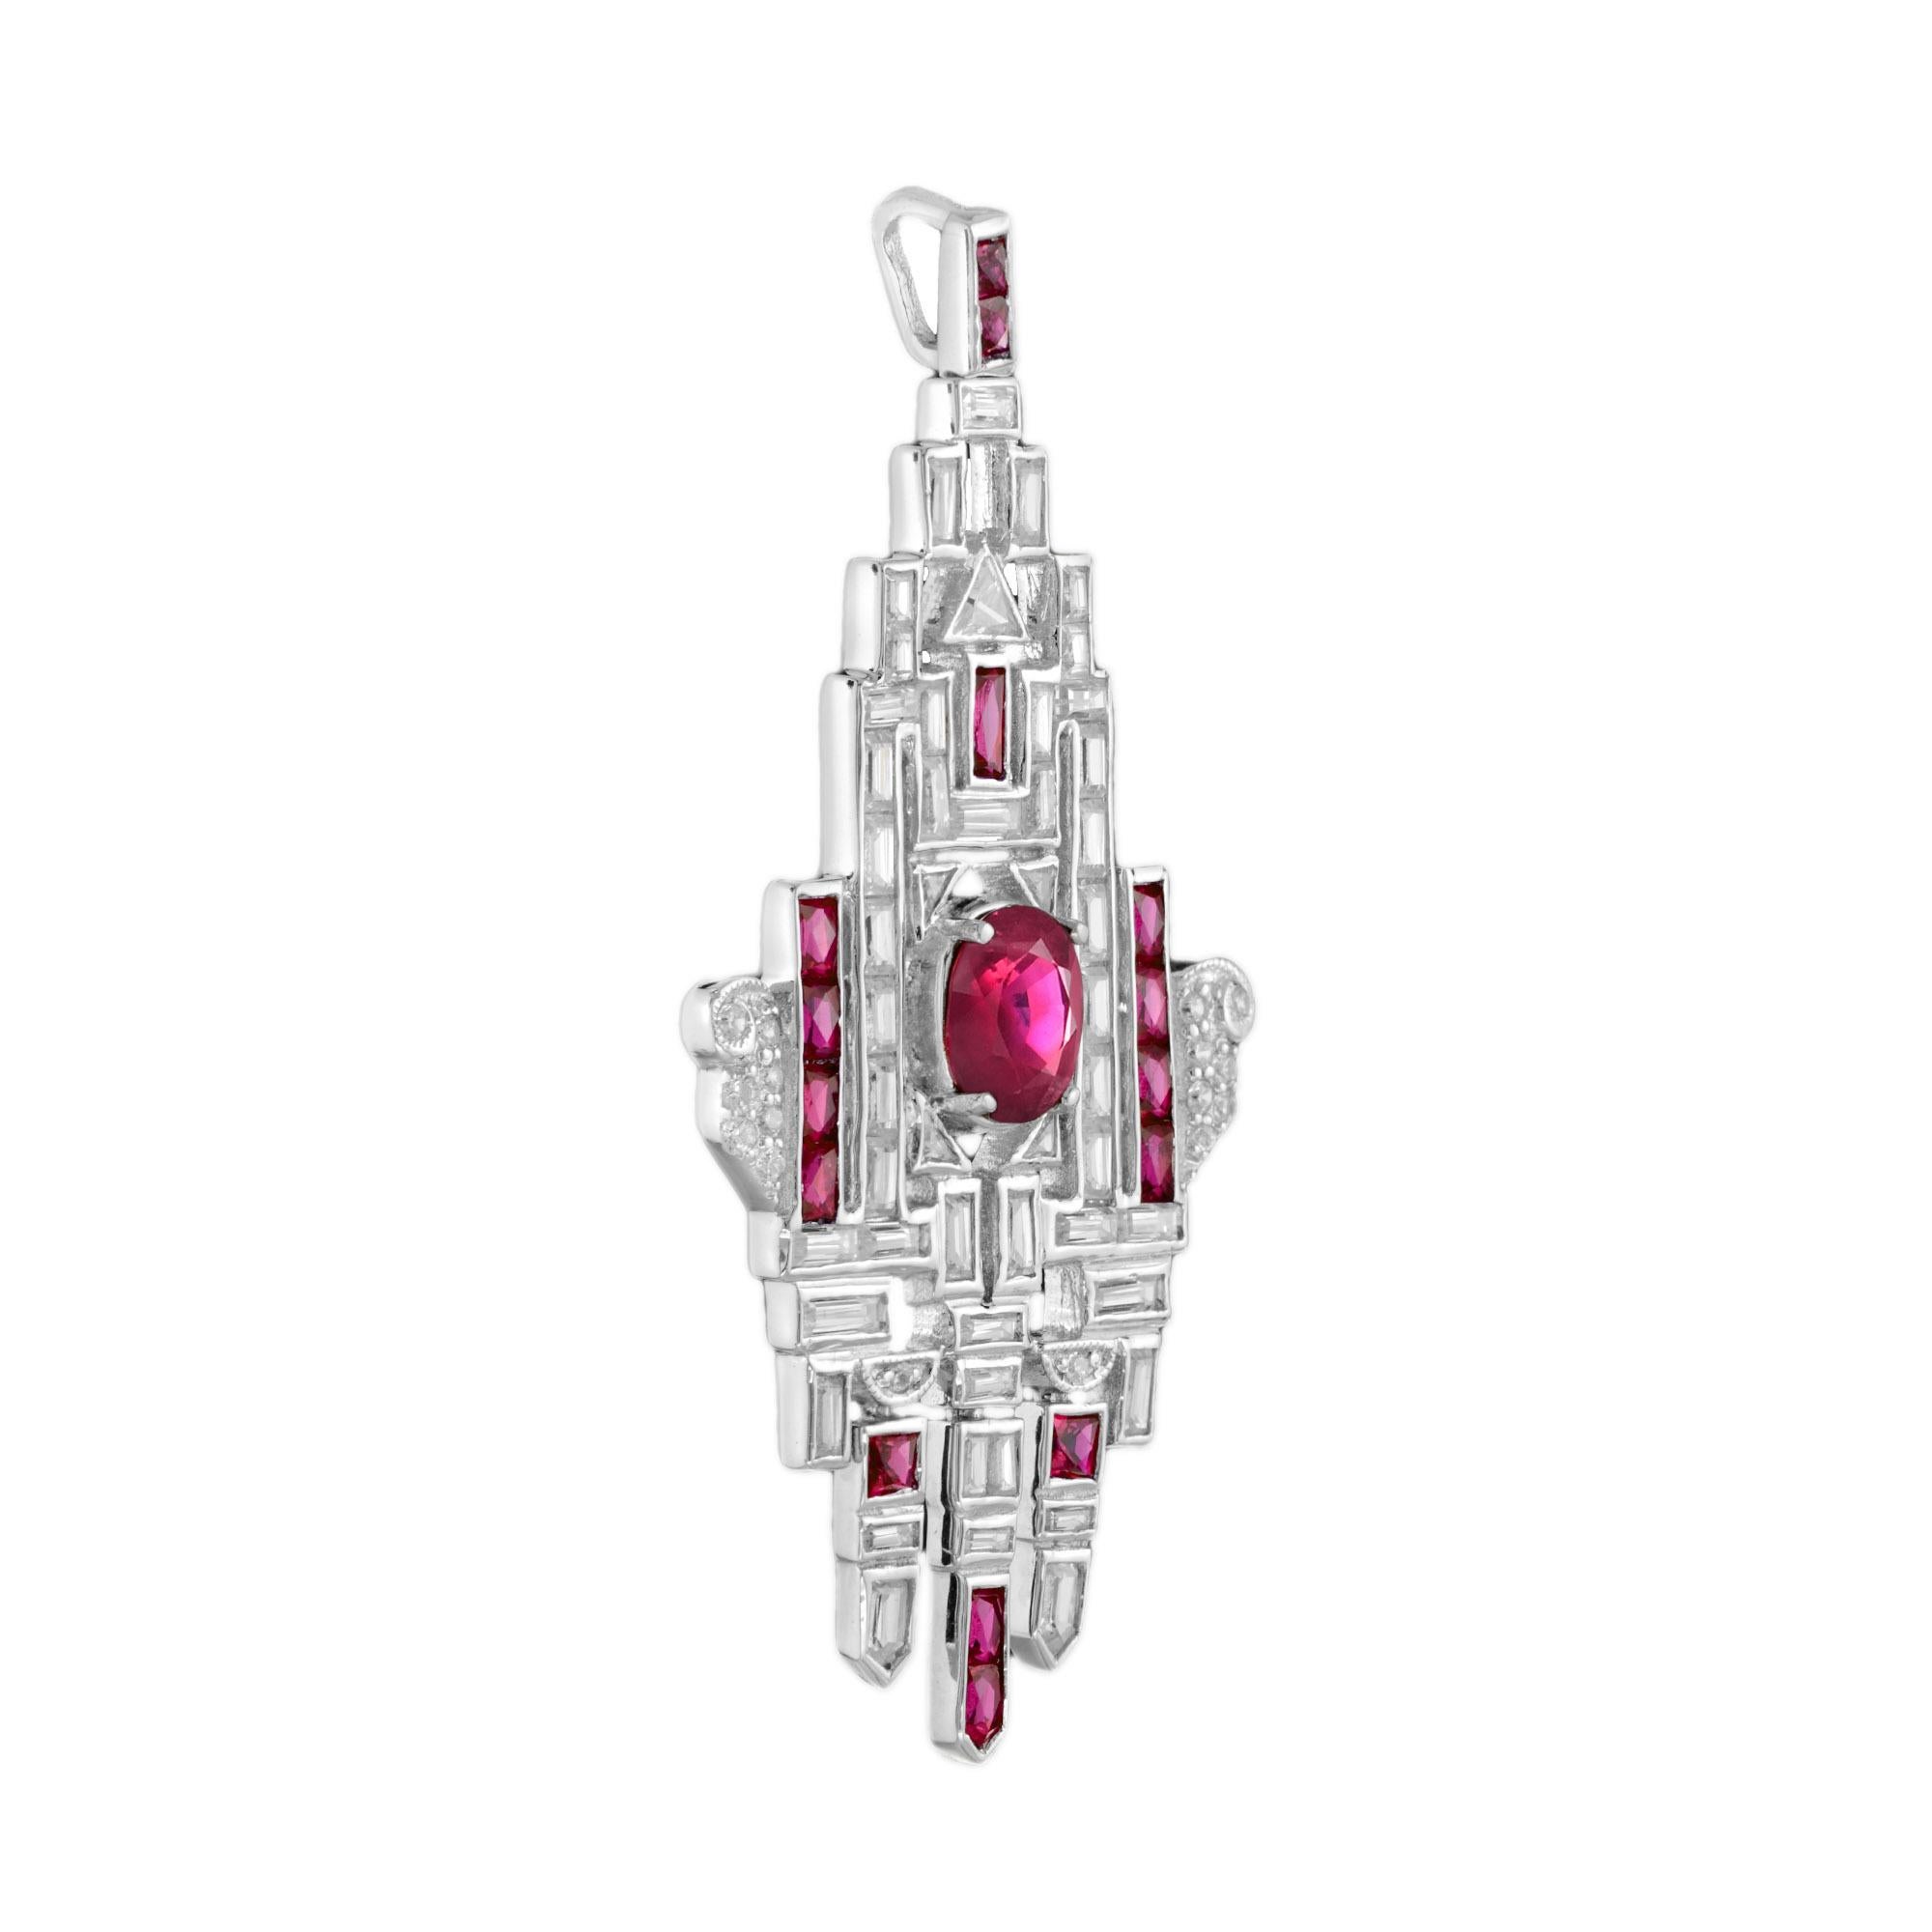 With a graphic line of French cut rubies and multi-shaped diamonds, the pendant is surprisingly unique of Art Deco design. The center oval ruby weight 1.5 carat and framed by total of 5.11 diamonds with 1.98 carat rubies, all crafted in 18K white